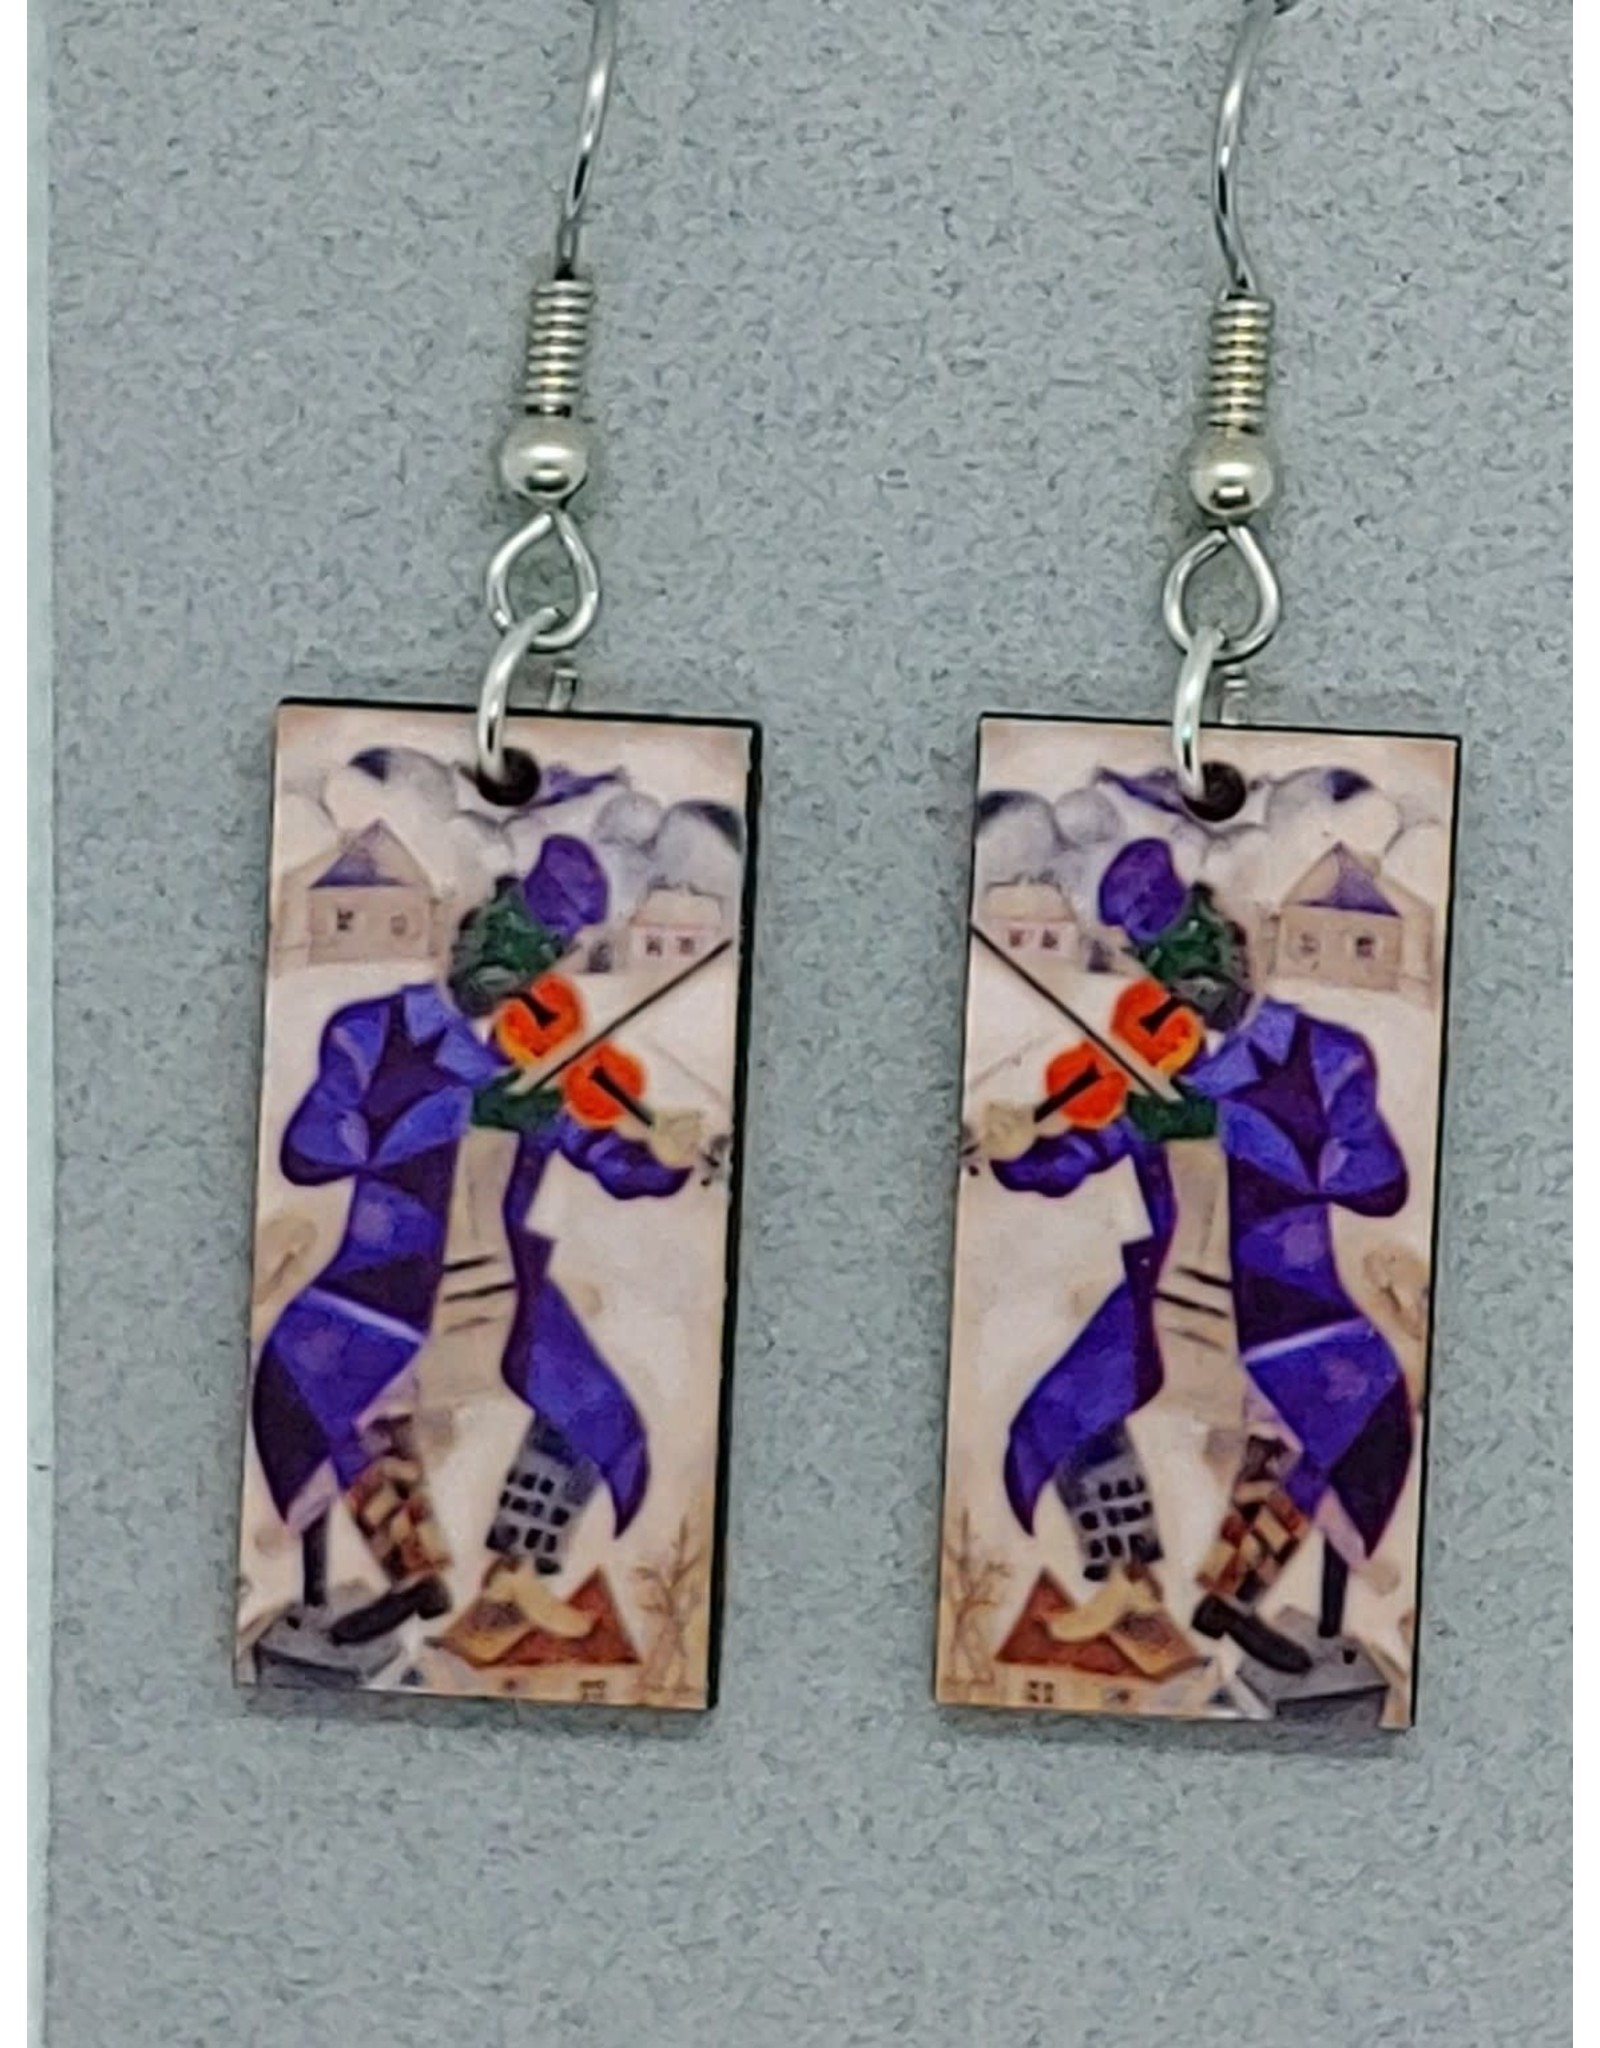 Trade roots Images of Art Dangles, Picture Vary, Guatemala